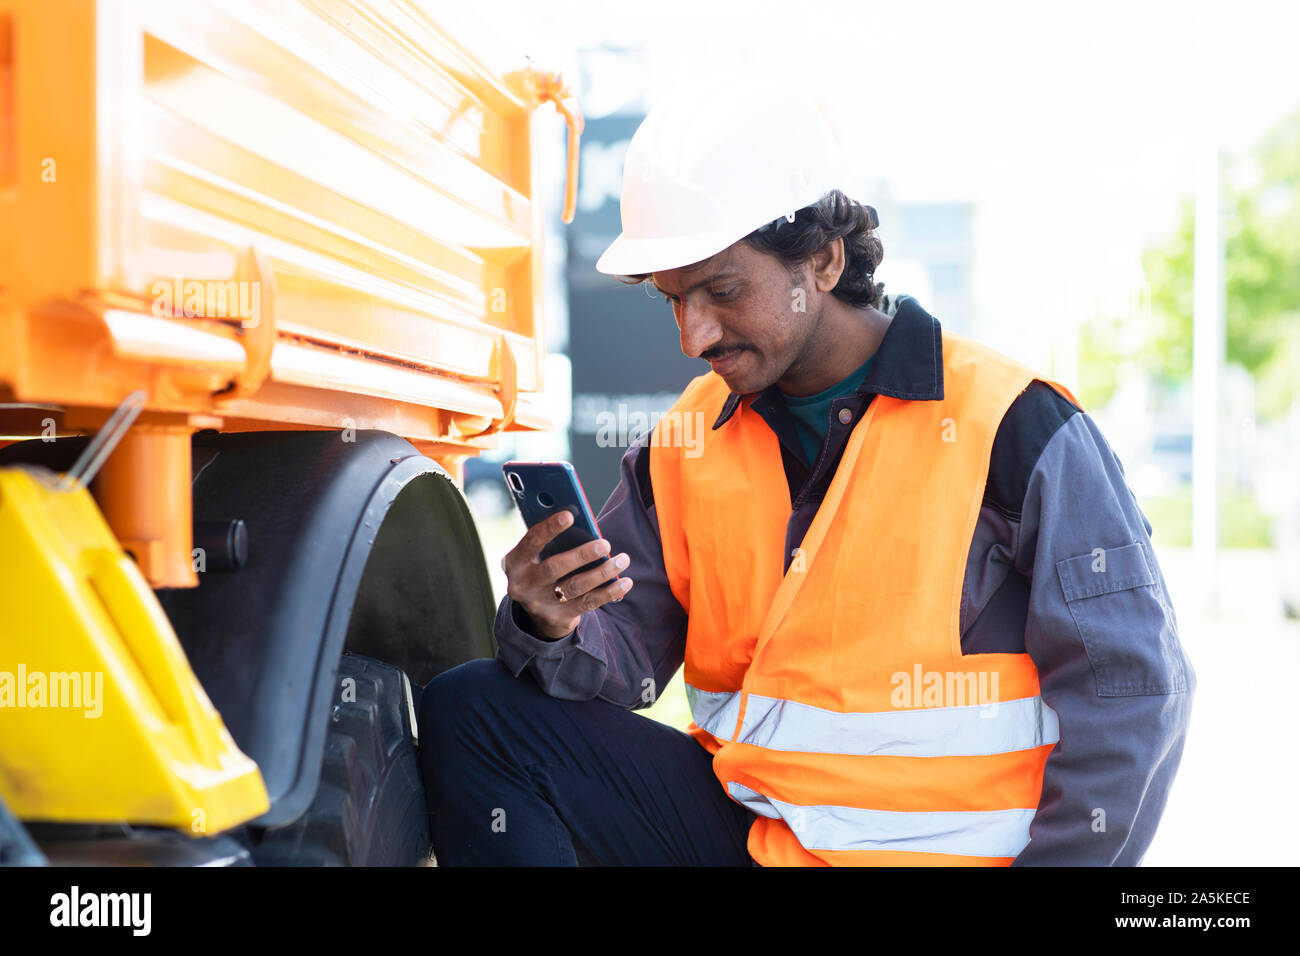 Male engineer standing next to yellow truck looking at smartphone Stock Photo